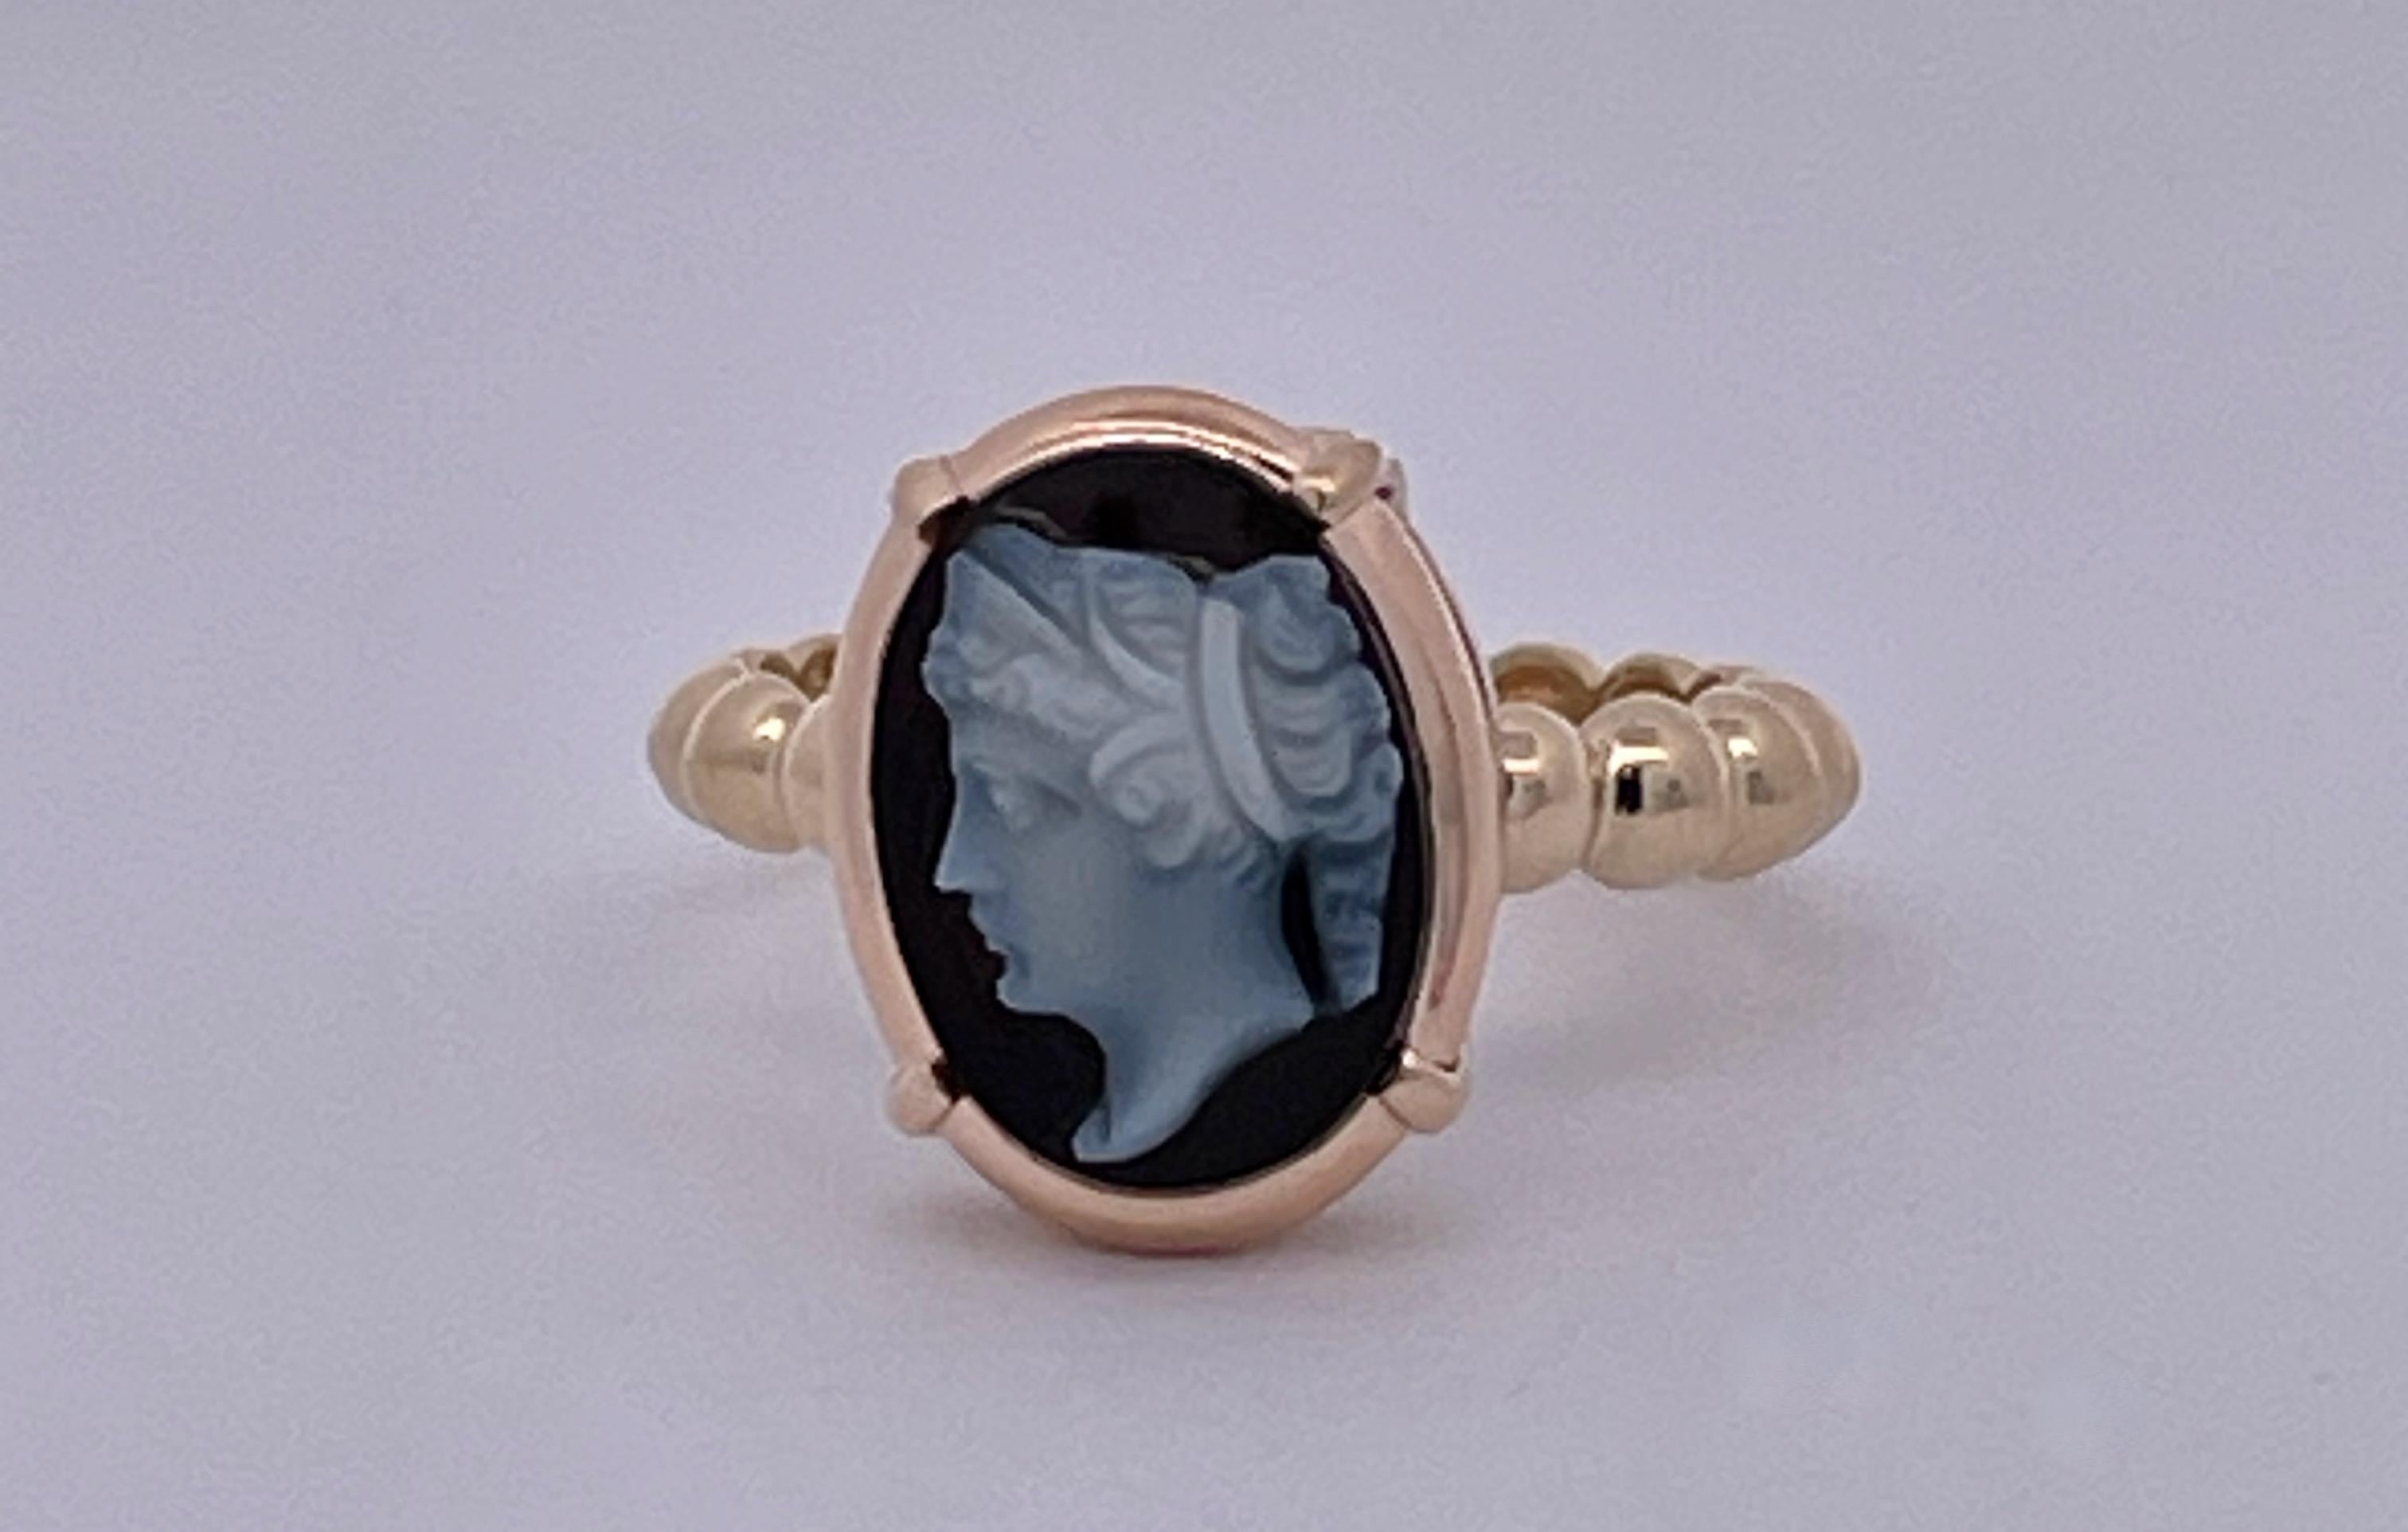 This lovely ring started life as a stick pin but I changed it into a lovely ring.  This portrait of a lady is carved on top this hardstone and a nice everyday ring.  The size is six and can be resized if needed. It is done in 14K yellow gold and the